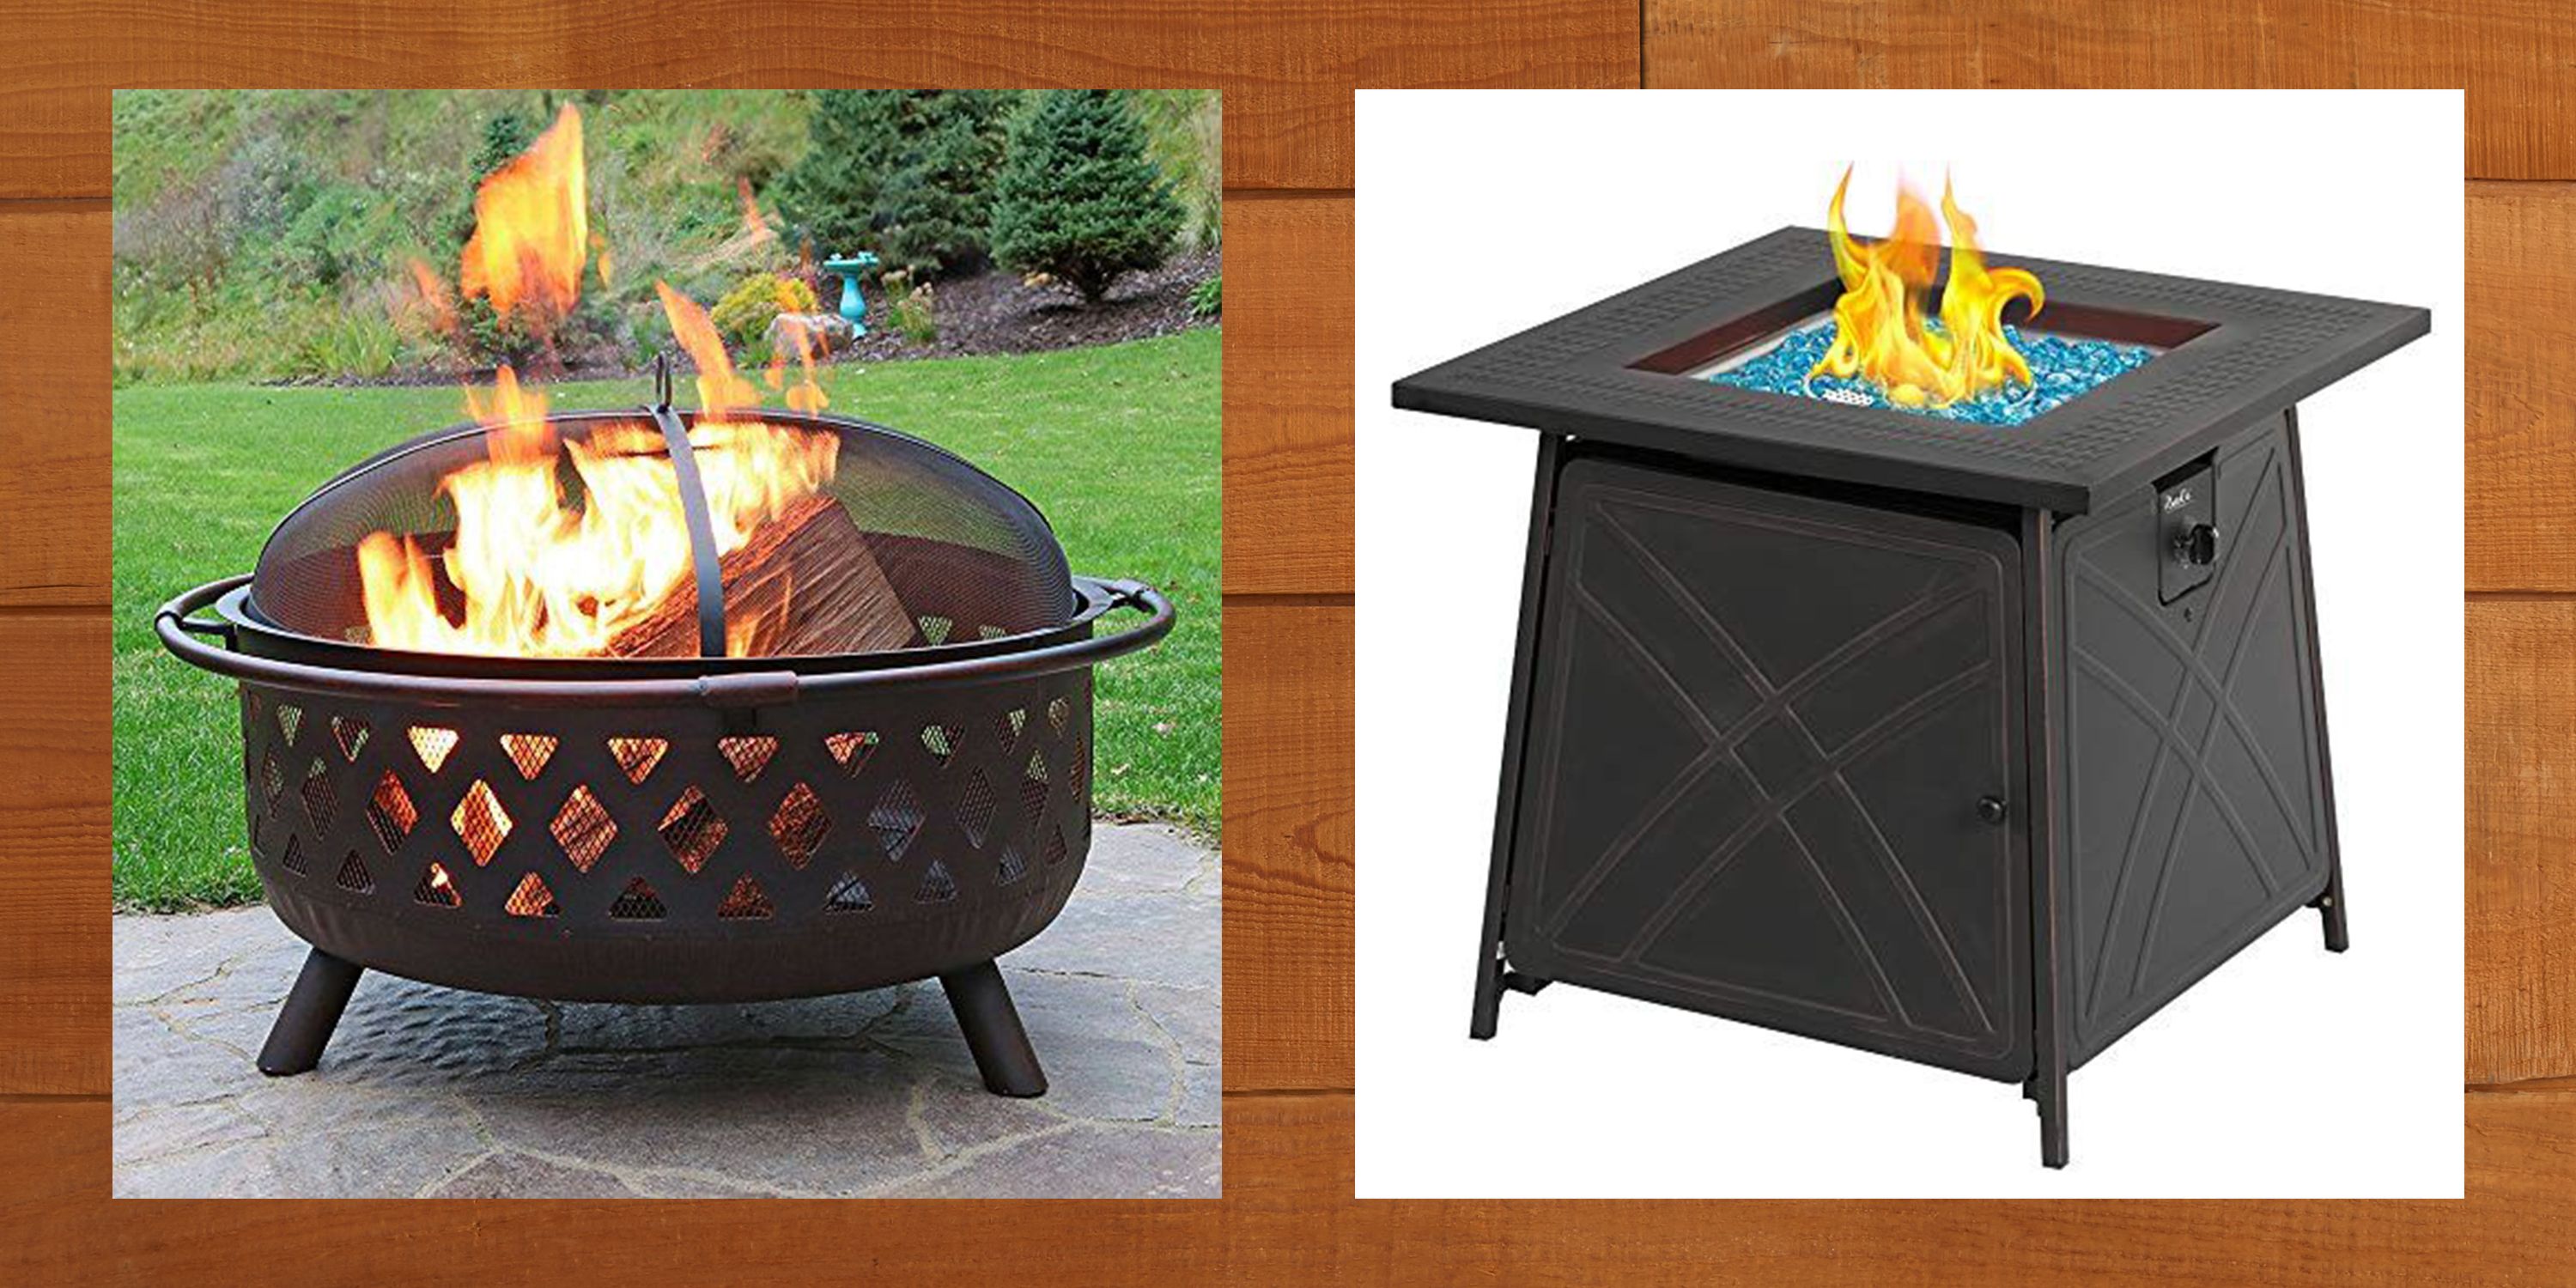 Top Wood Burning And Propane Fire Pits, Black Friday Fire Pit